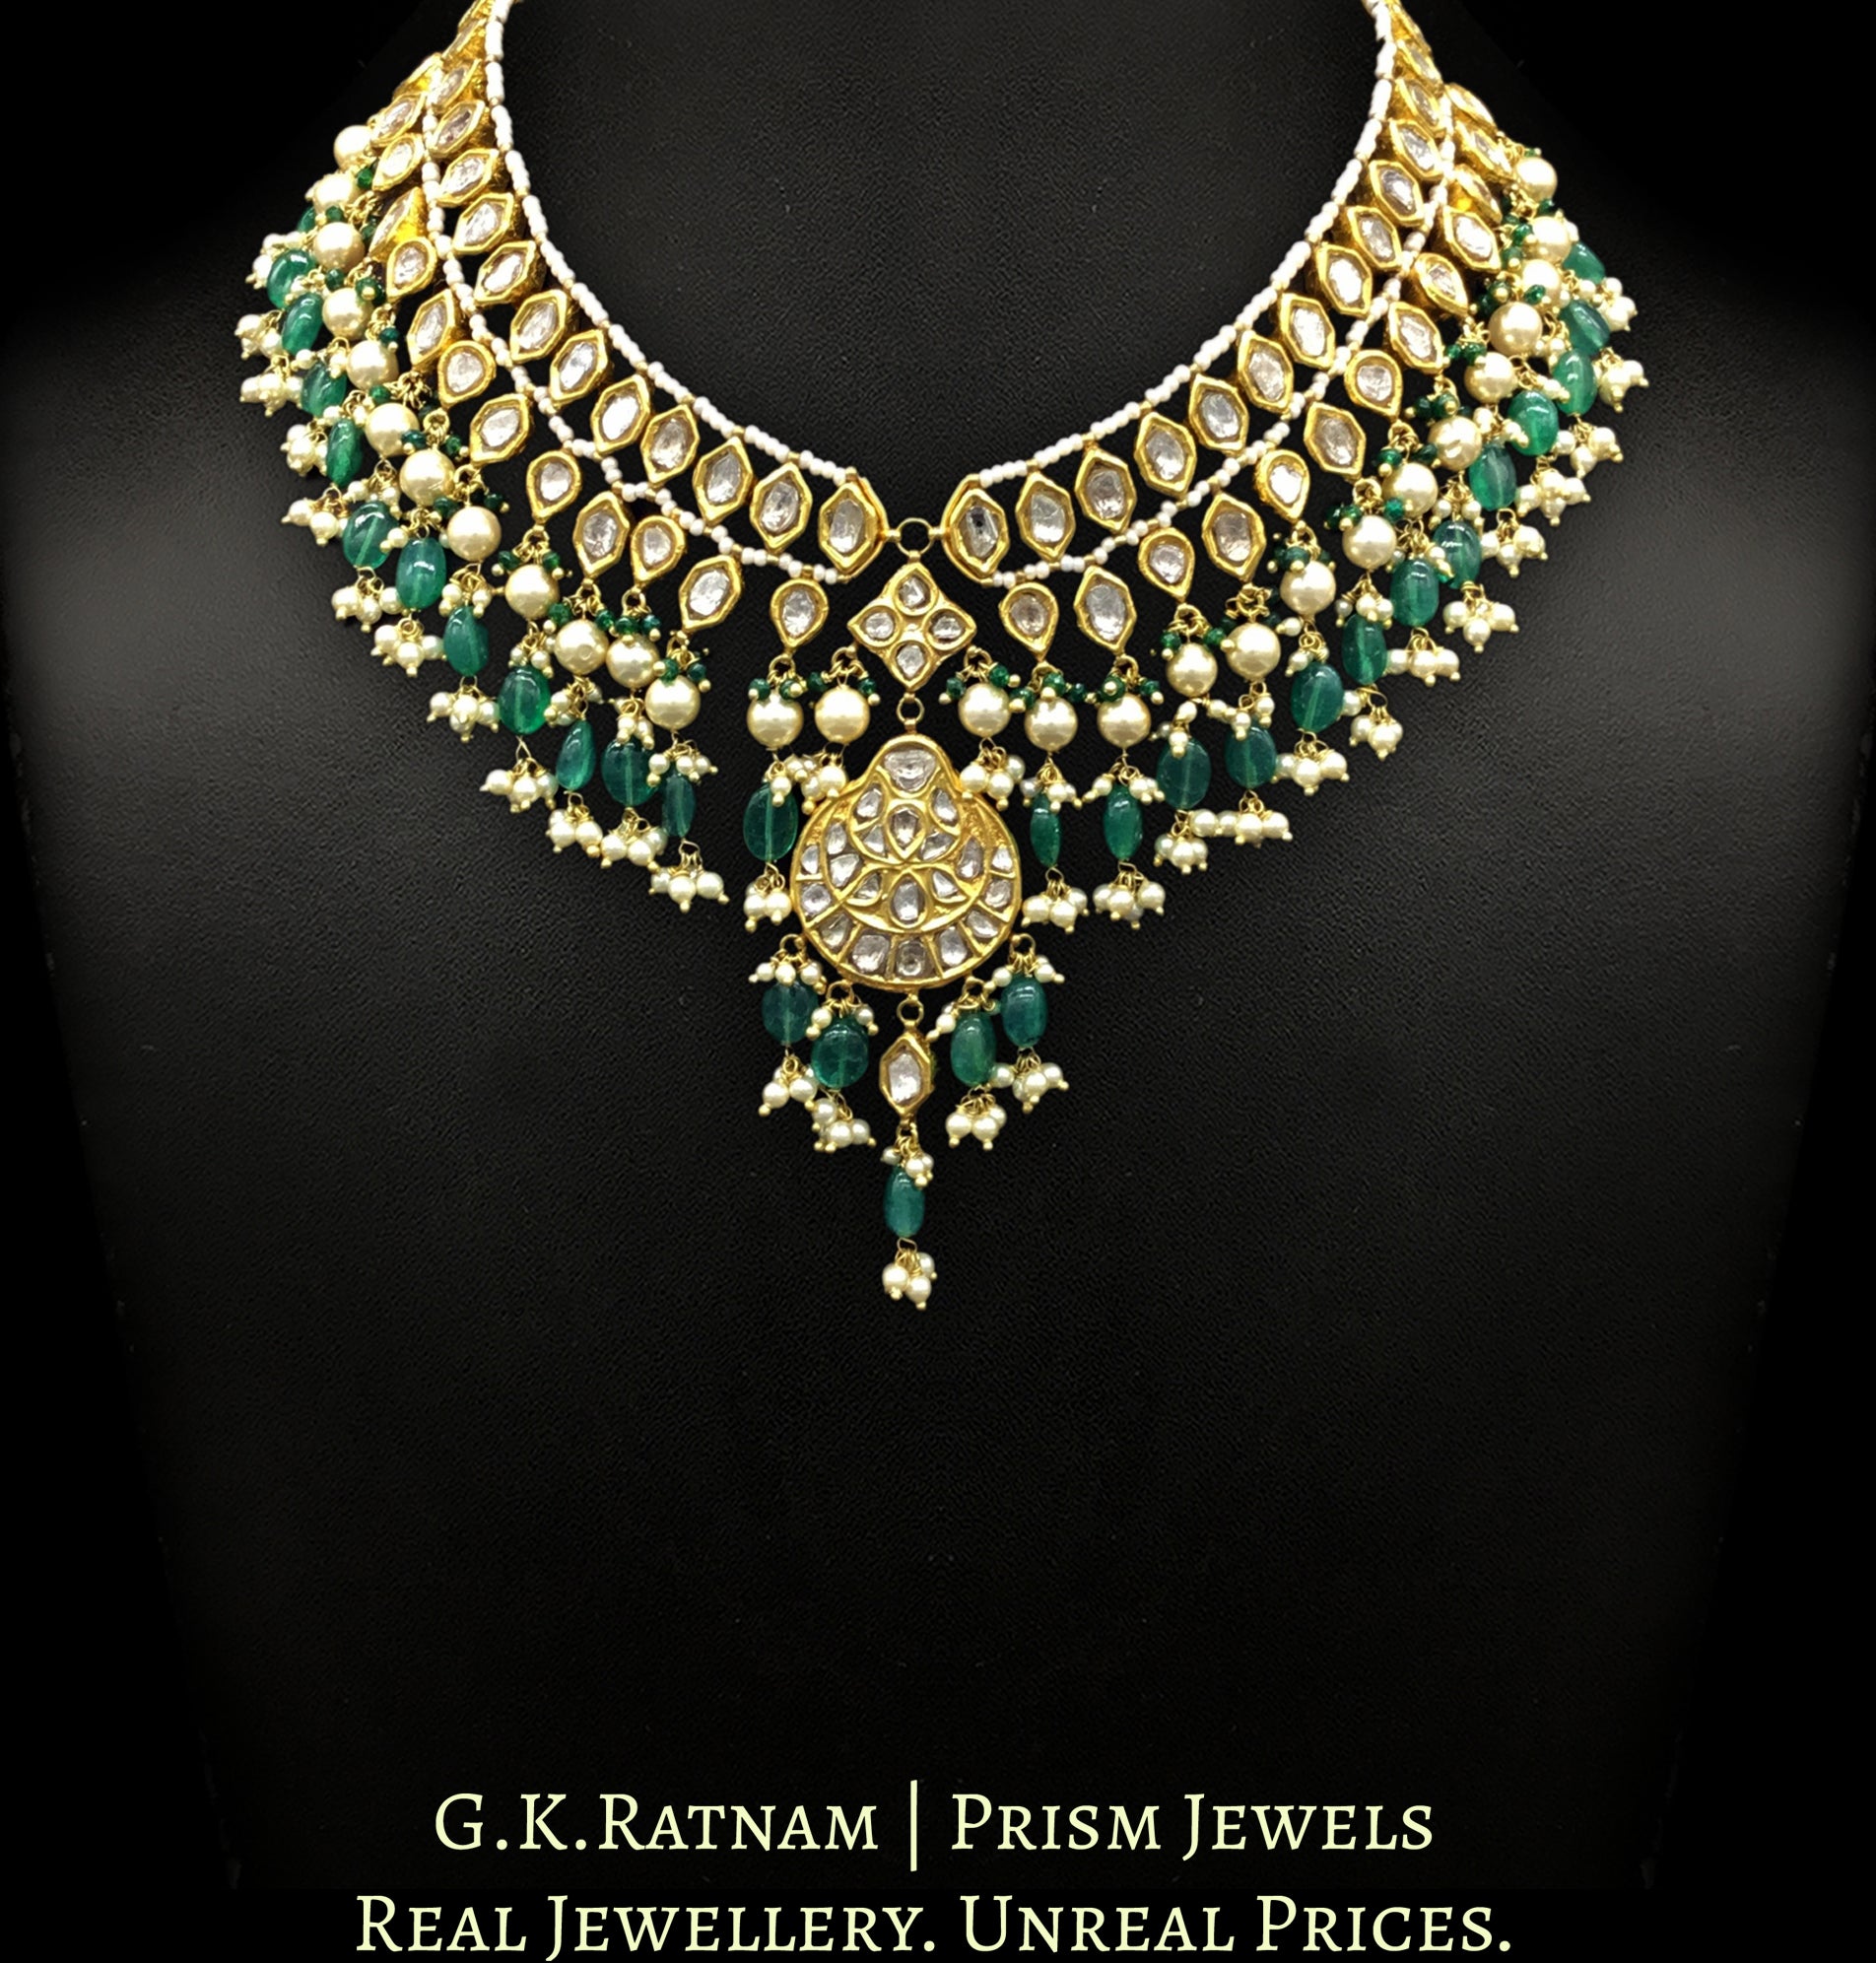 23k Gold and Diamond Polki Matha Patti cum Necklace Set with pearls and green beryls